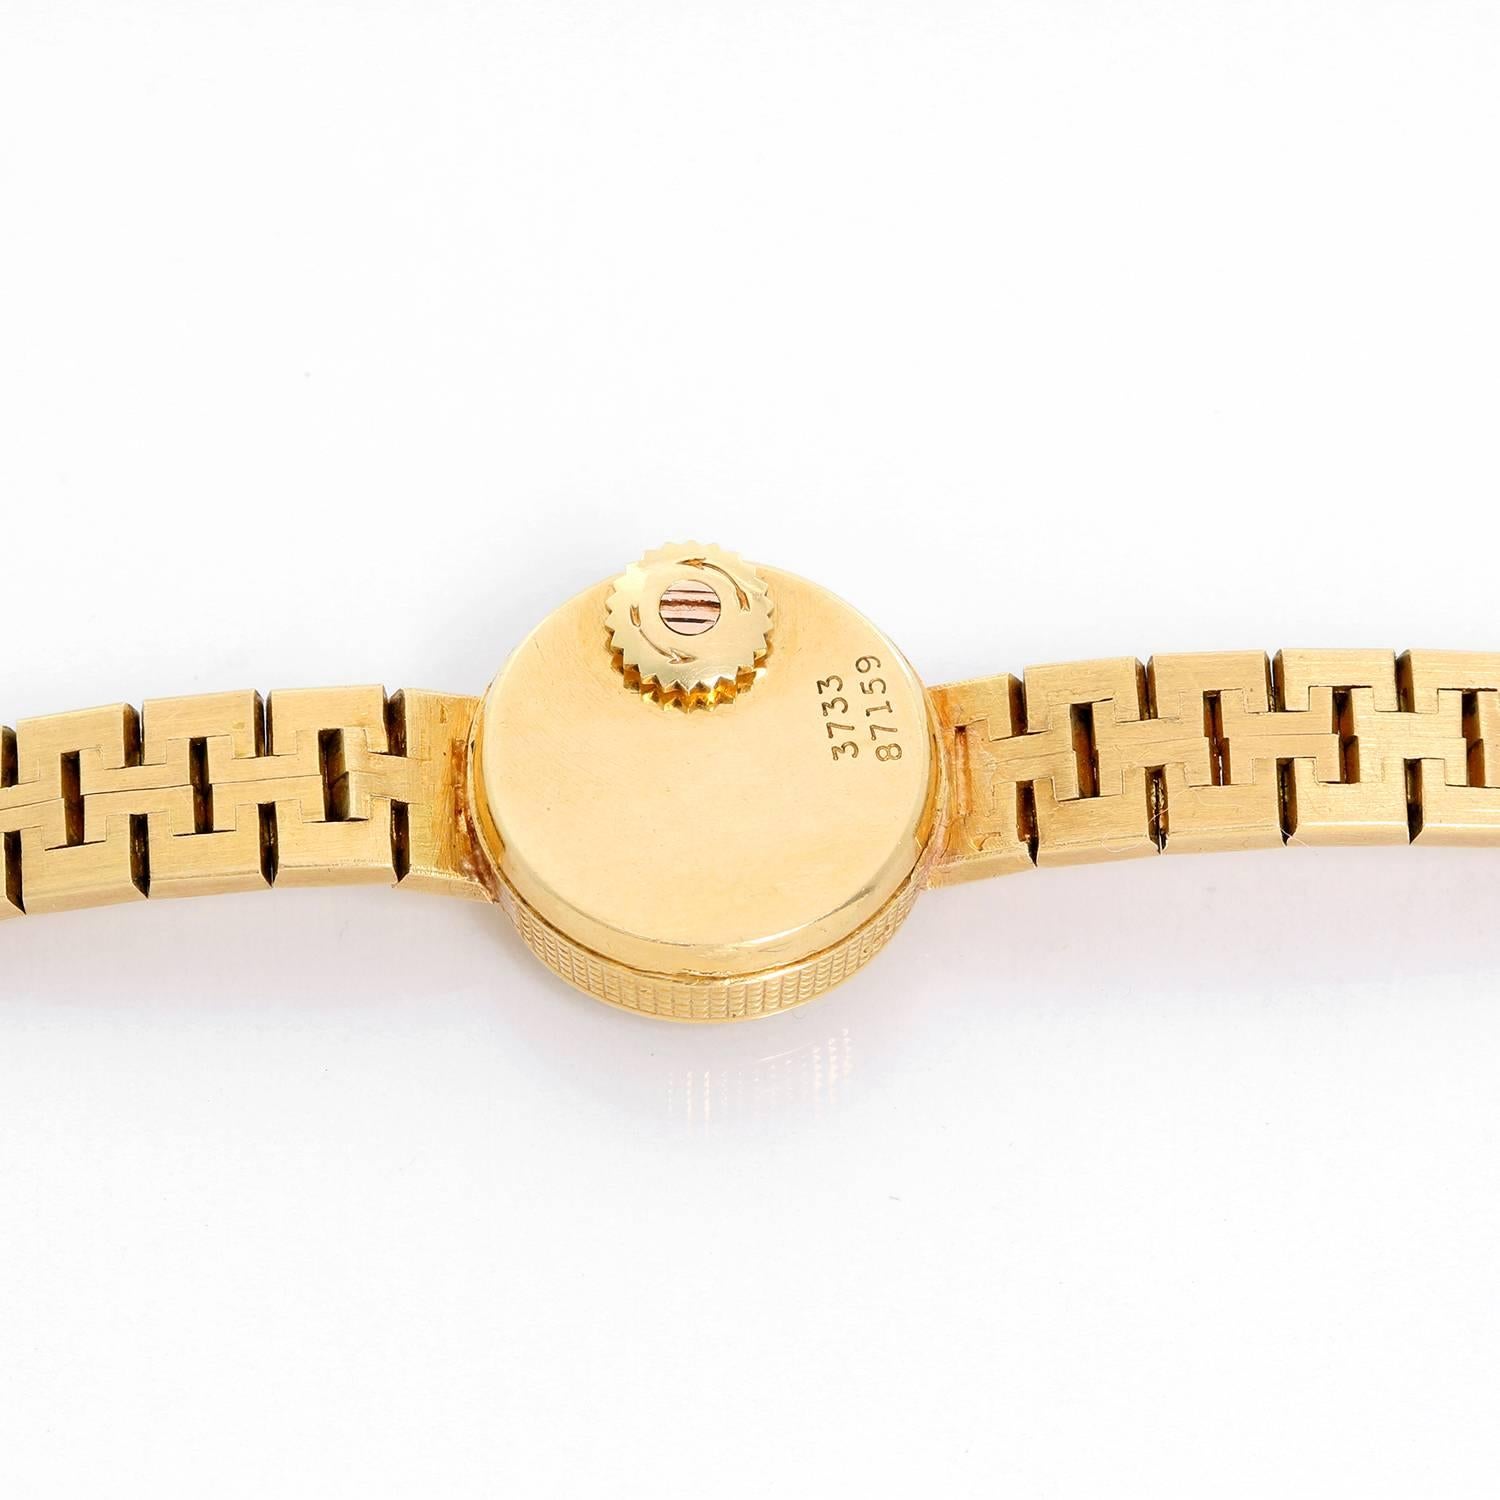 Vintage Piaget 18K Yellow Gold Ladies Watch Ref 3733 -  Manual. 18K Yellow Gold ( 17 mm ). Champagne texture dial with black stick hour markers. 18K yellow gold textured bracelet. Will fit a 5 1/2 in wrist size. Pre-owned with custom box.